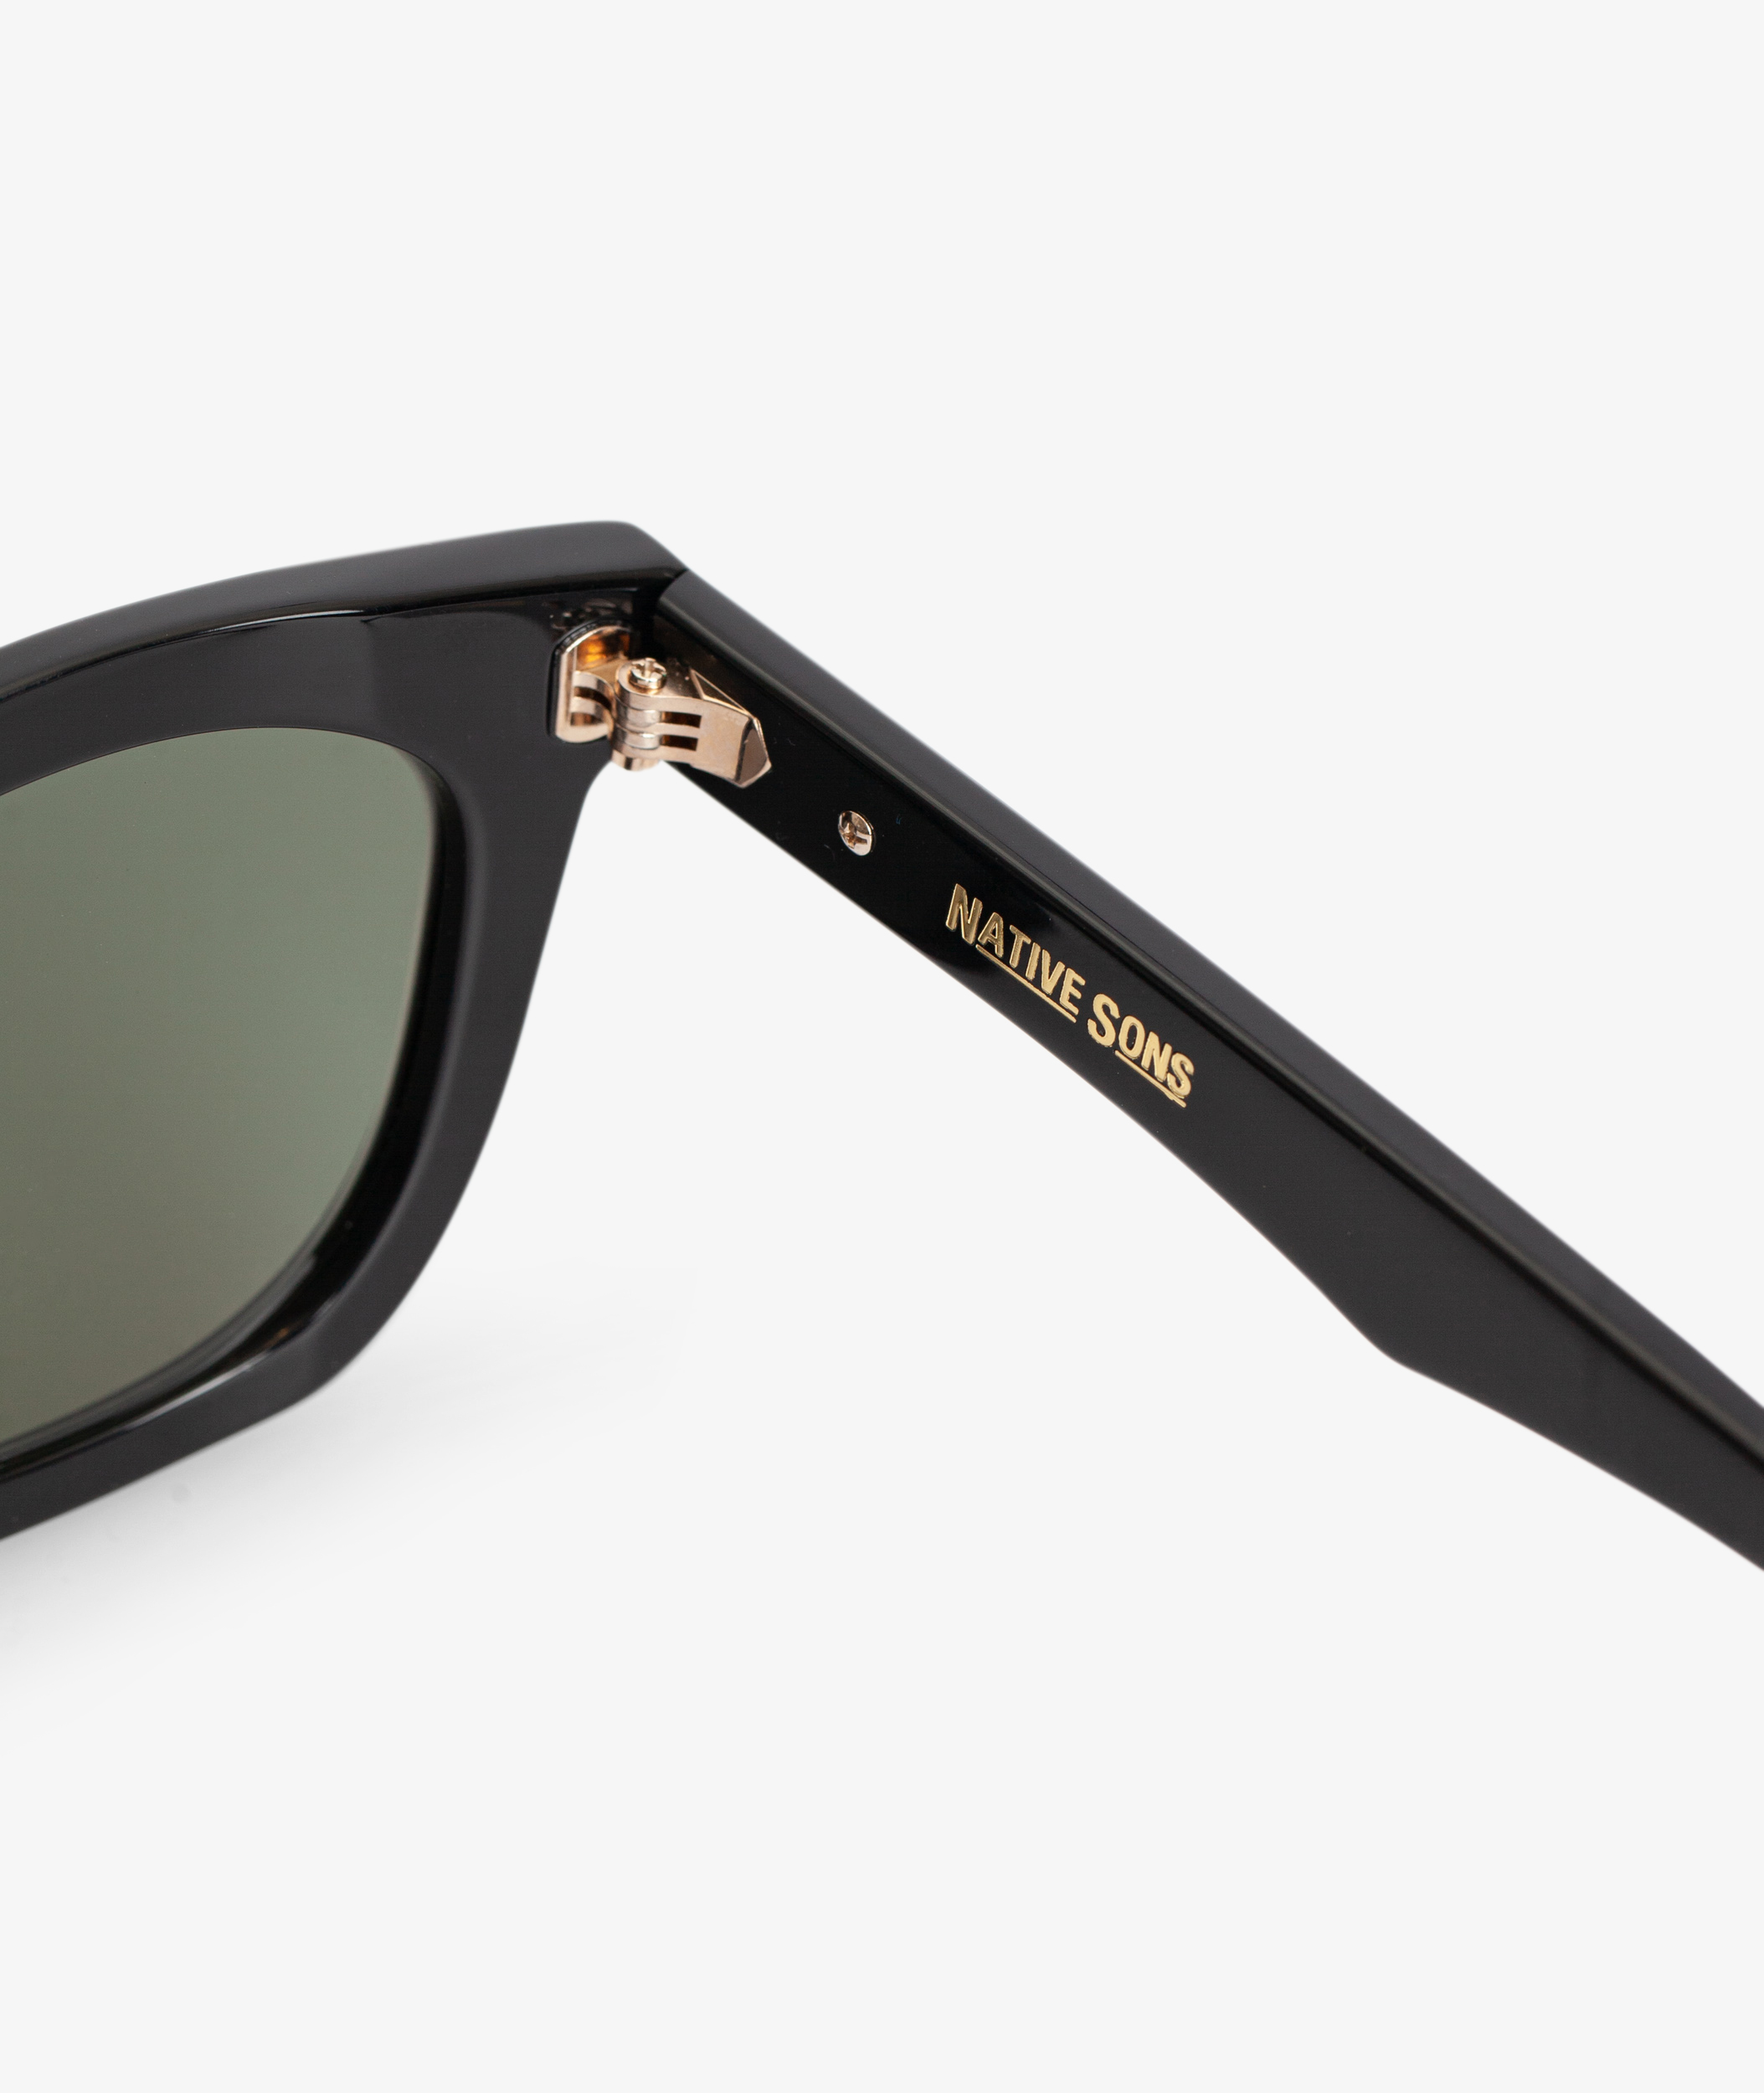 Norse Store | Shipping Worldwide - Sunglasses - Native Sons